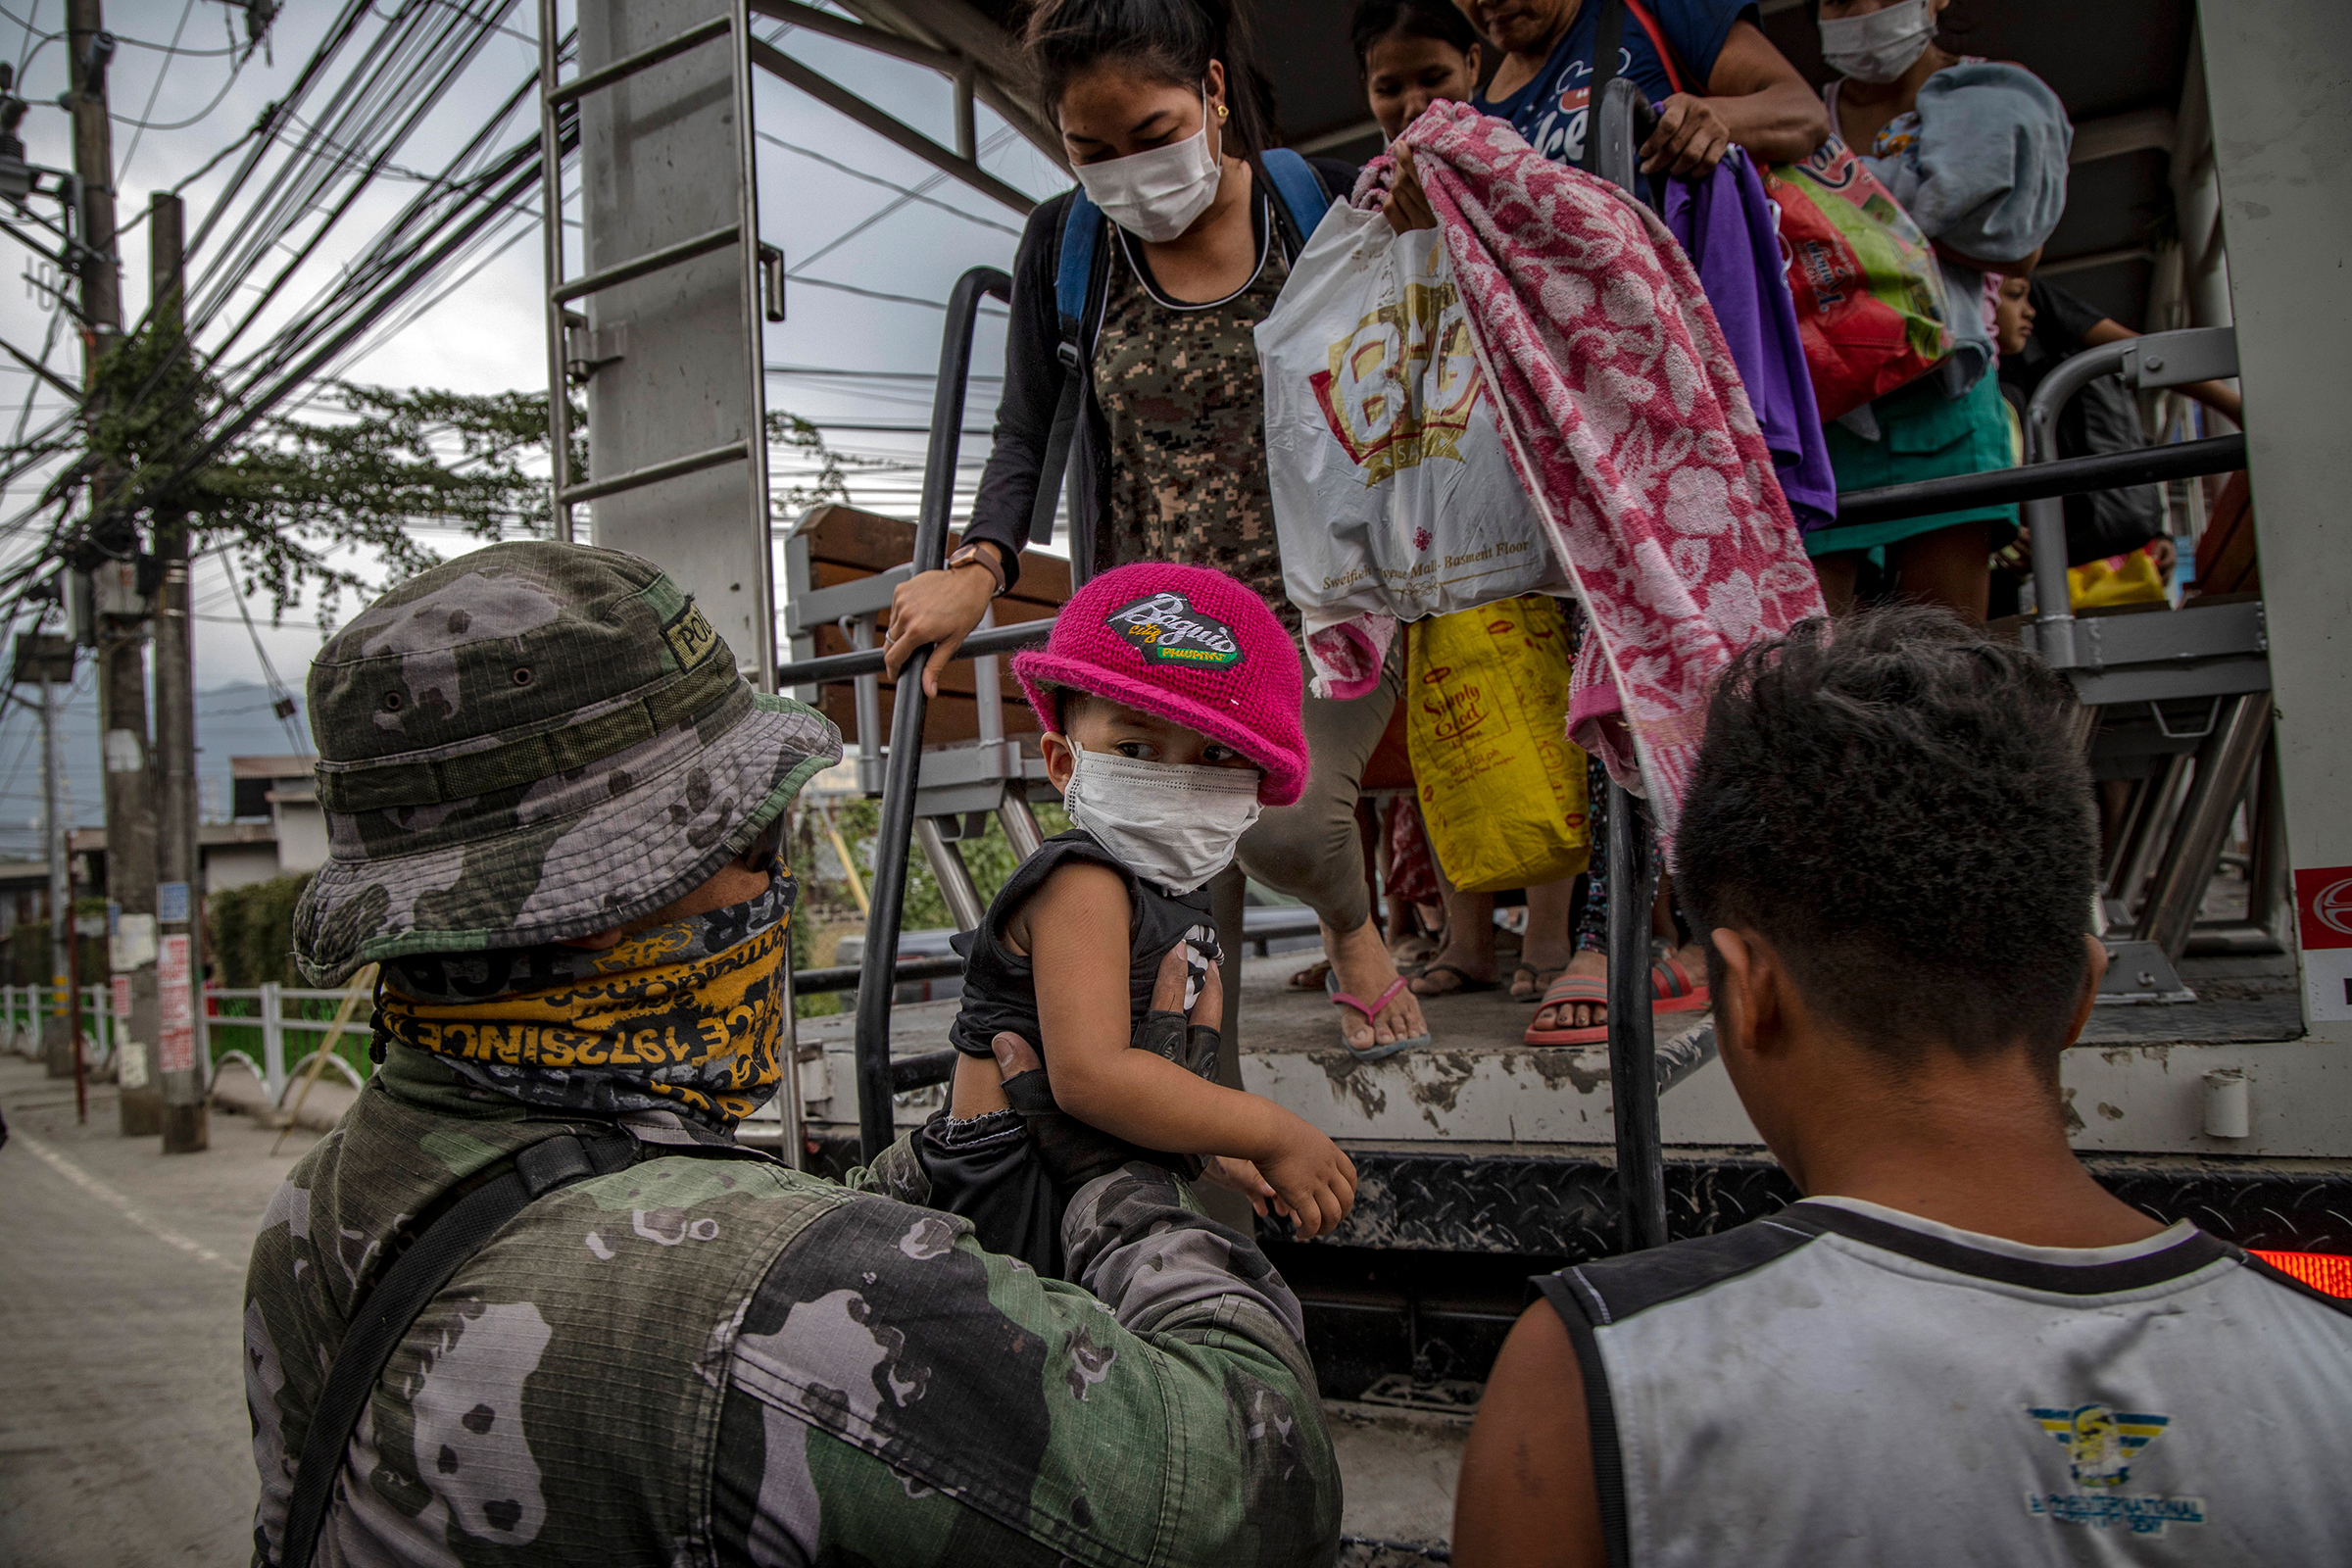 Residents fleeing the eruption arrive to an evacuation center in Santo Thomas on Jan. 13. (Ezra Acayan—Getty Images)